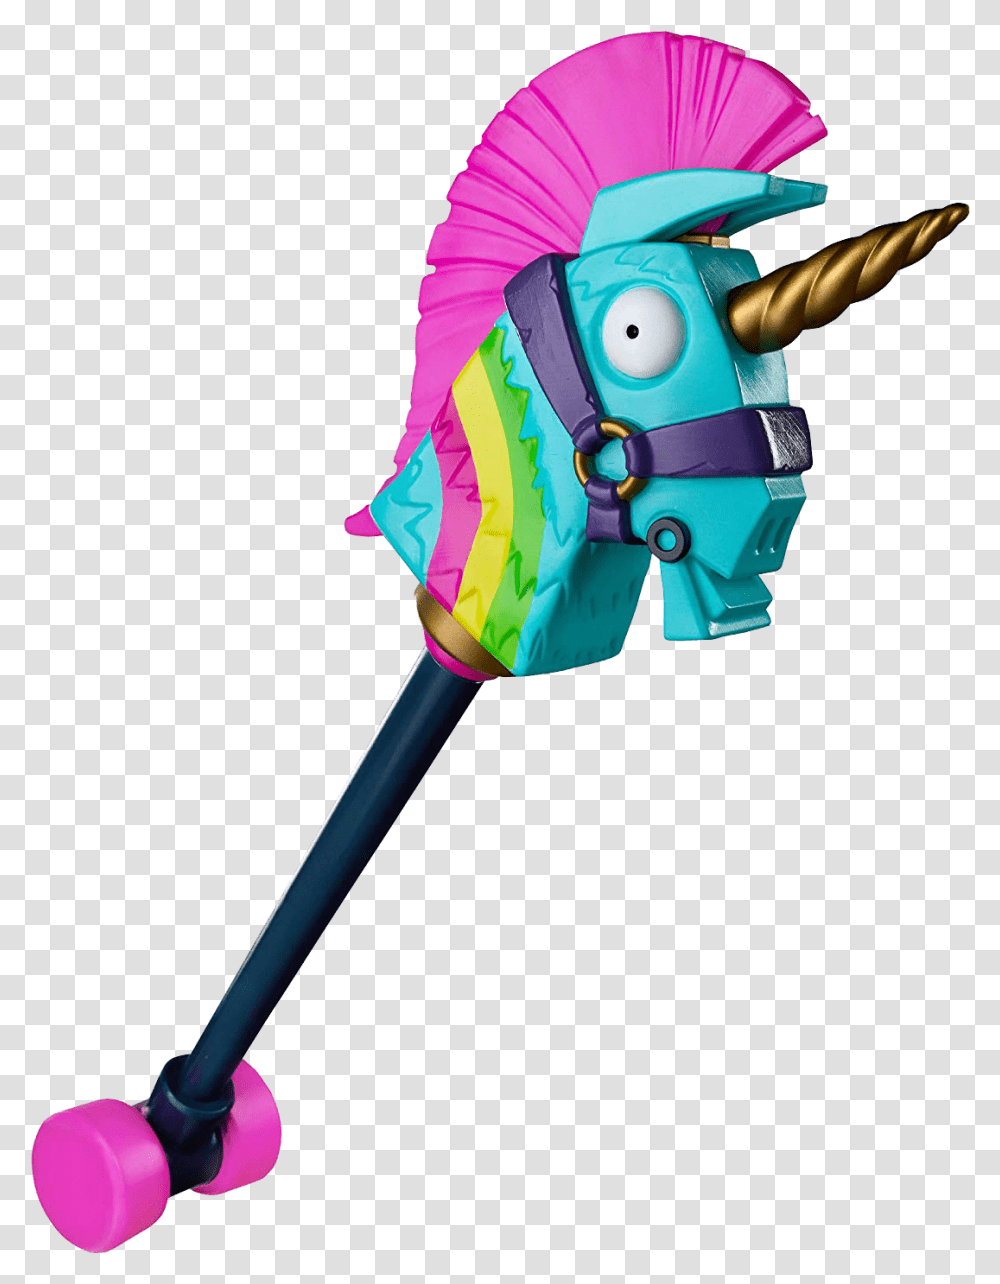 Download Hd Rainbow Smash Pickaxe See Youtube Video For Fortnite Rainbow Smash, Toy, Costume, Light, Weapon Transparent Png